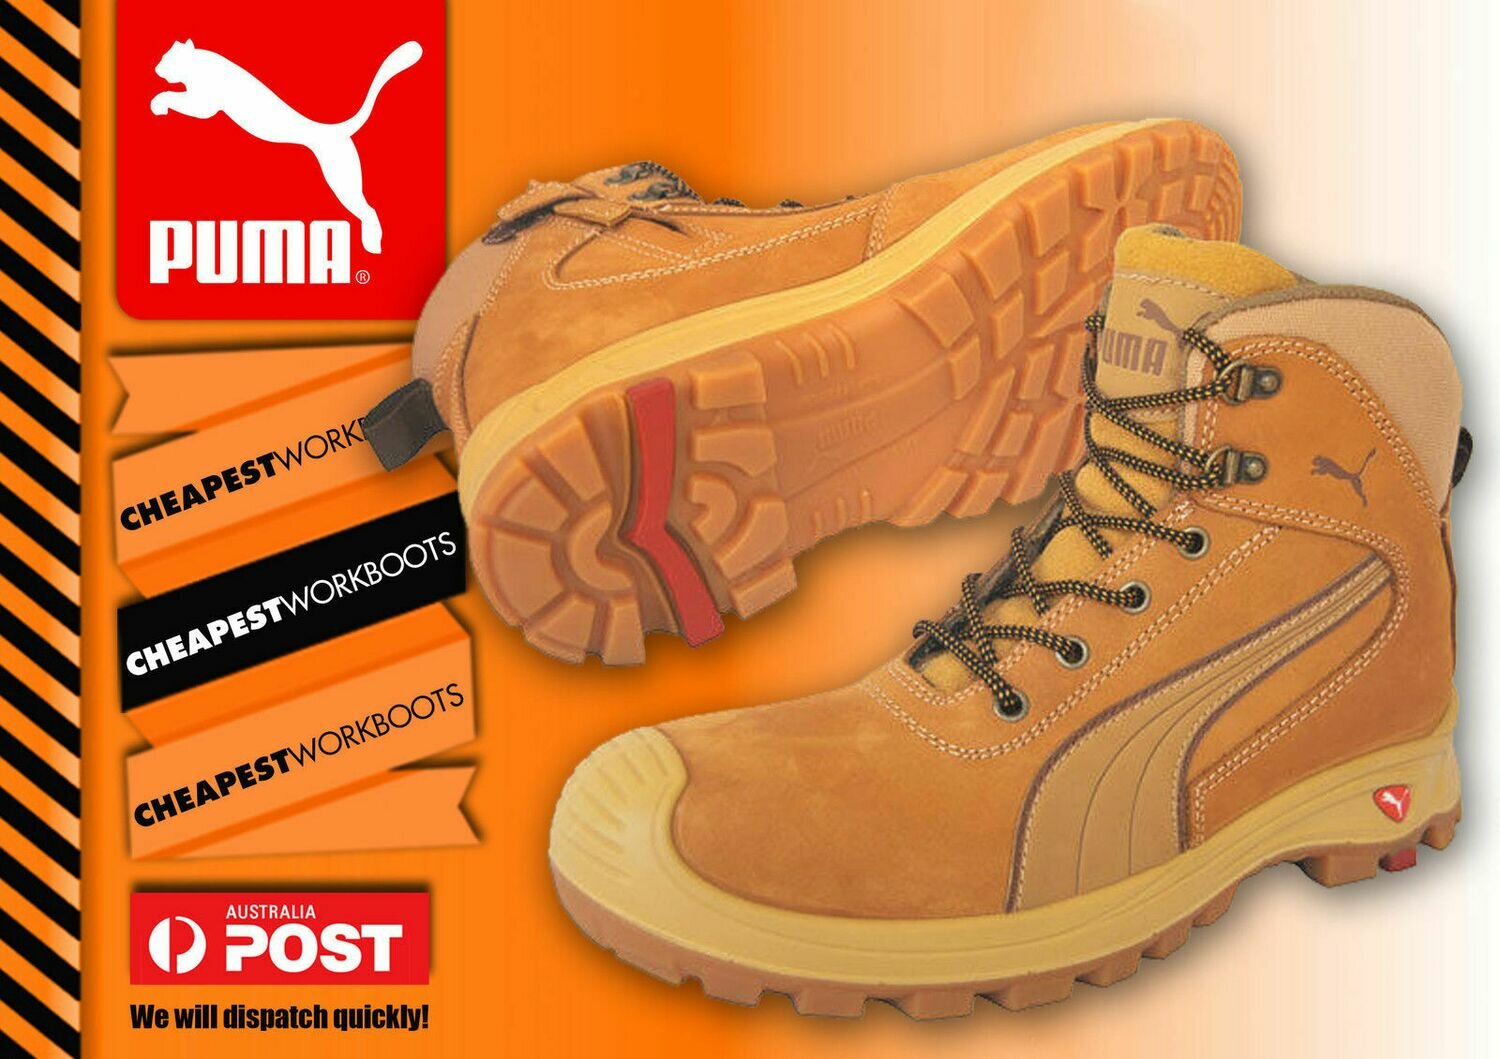 Puma Nullarbor 630367 Work Boots Composite Toe Safety Cap Zip-Sider CHEAPEST